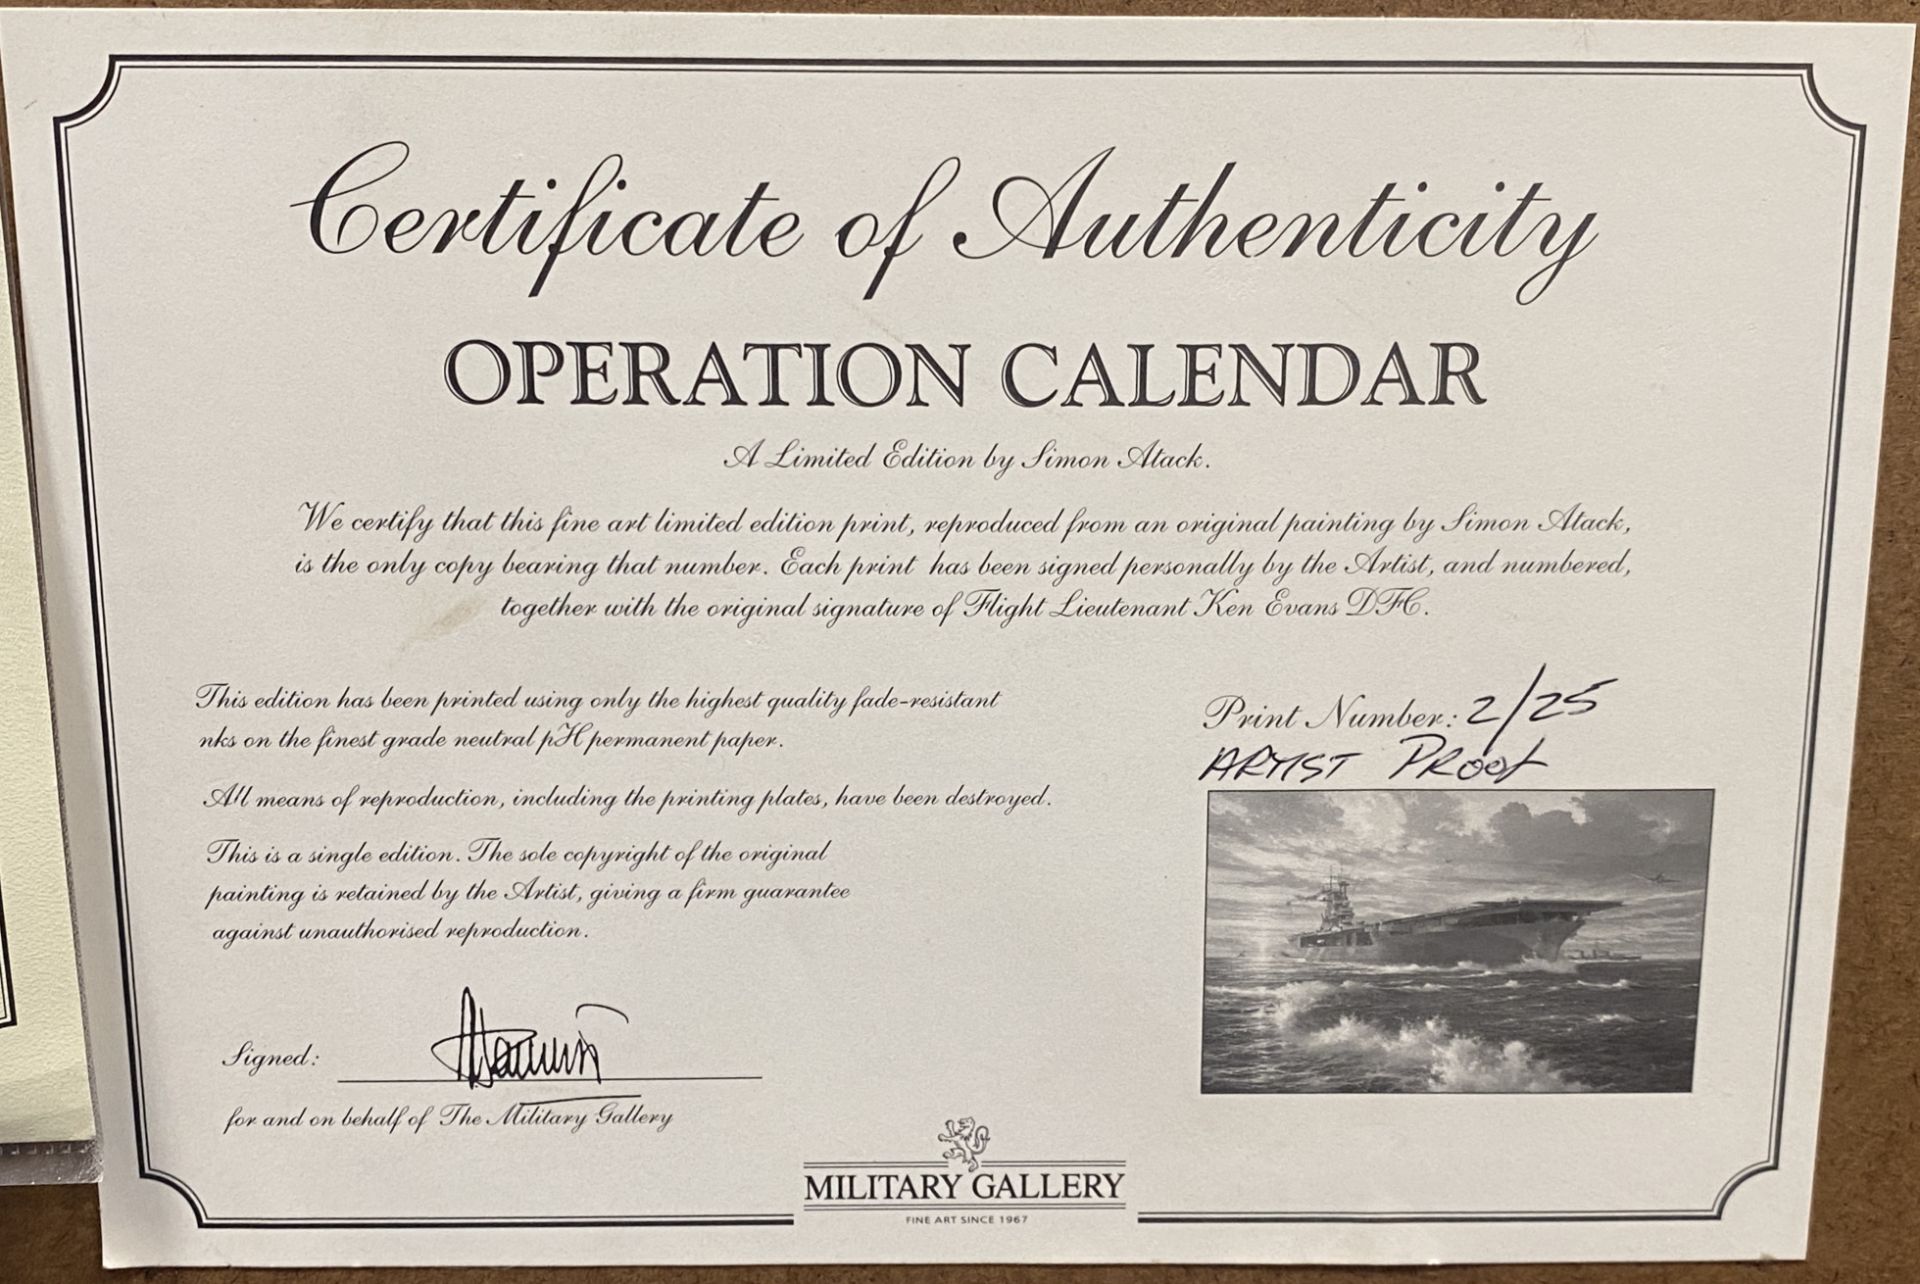 Simon Atack 'Operation Calendar' a framed artists proof no 2/25 featuring spitfires taking off from - Image 7 of 8